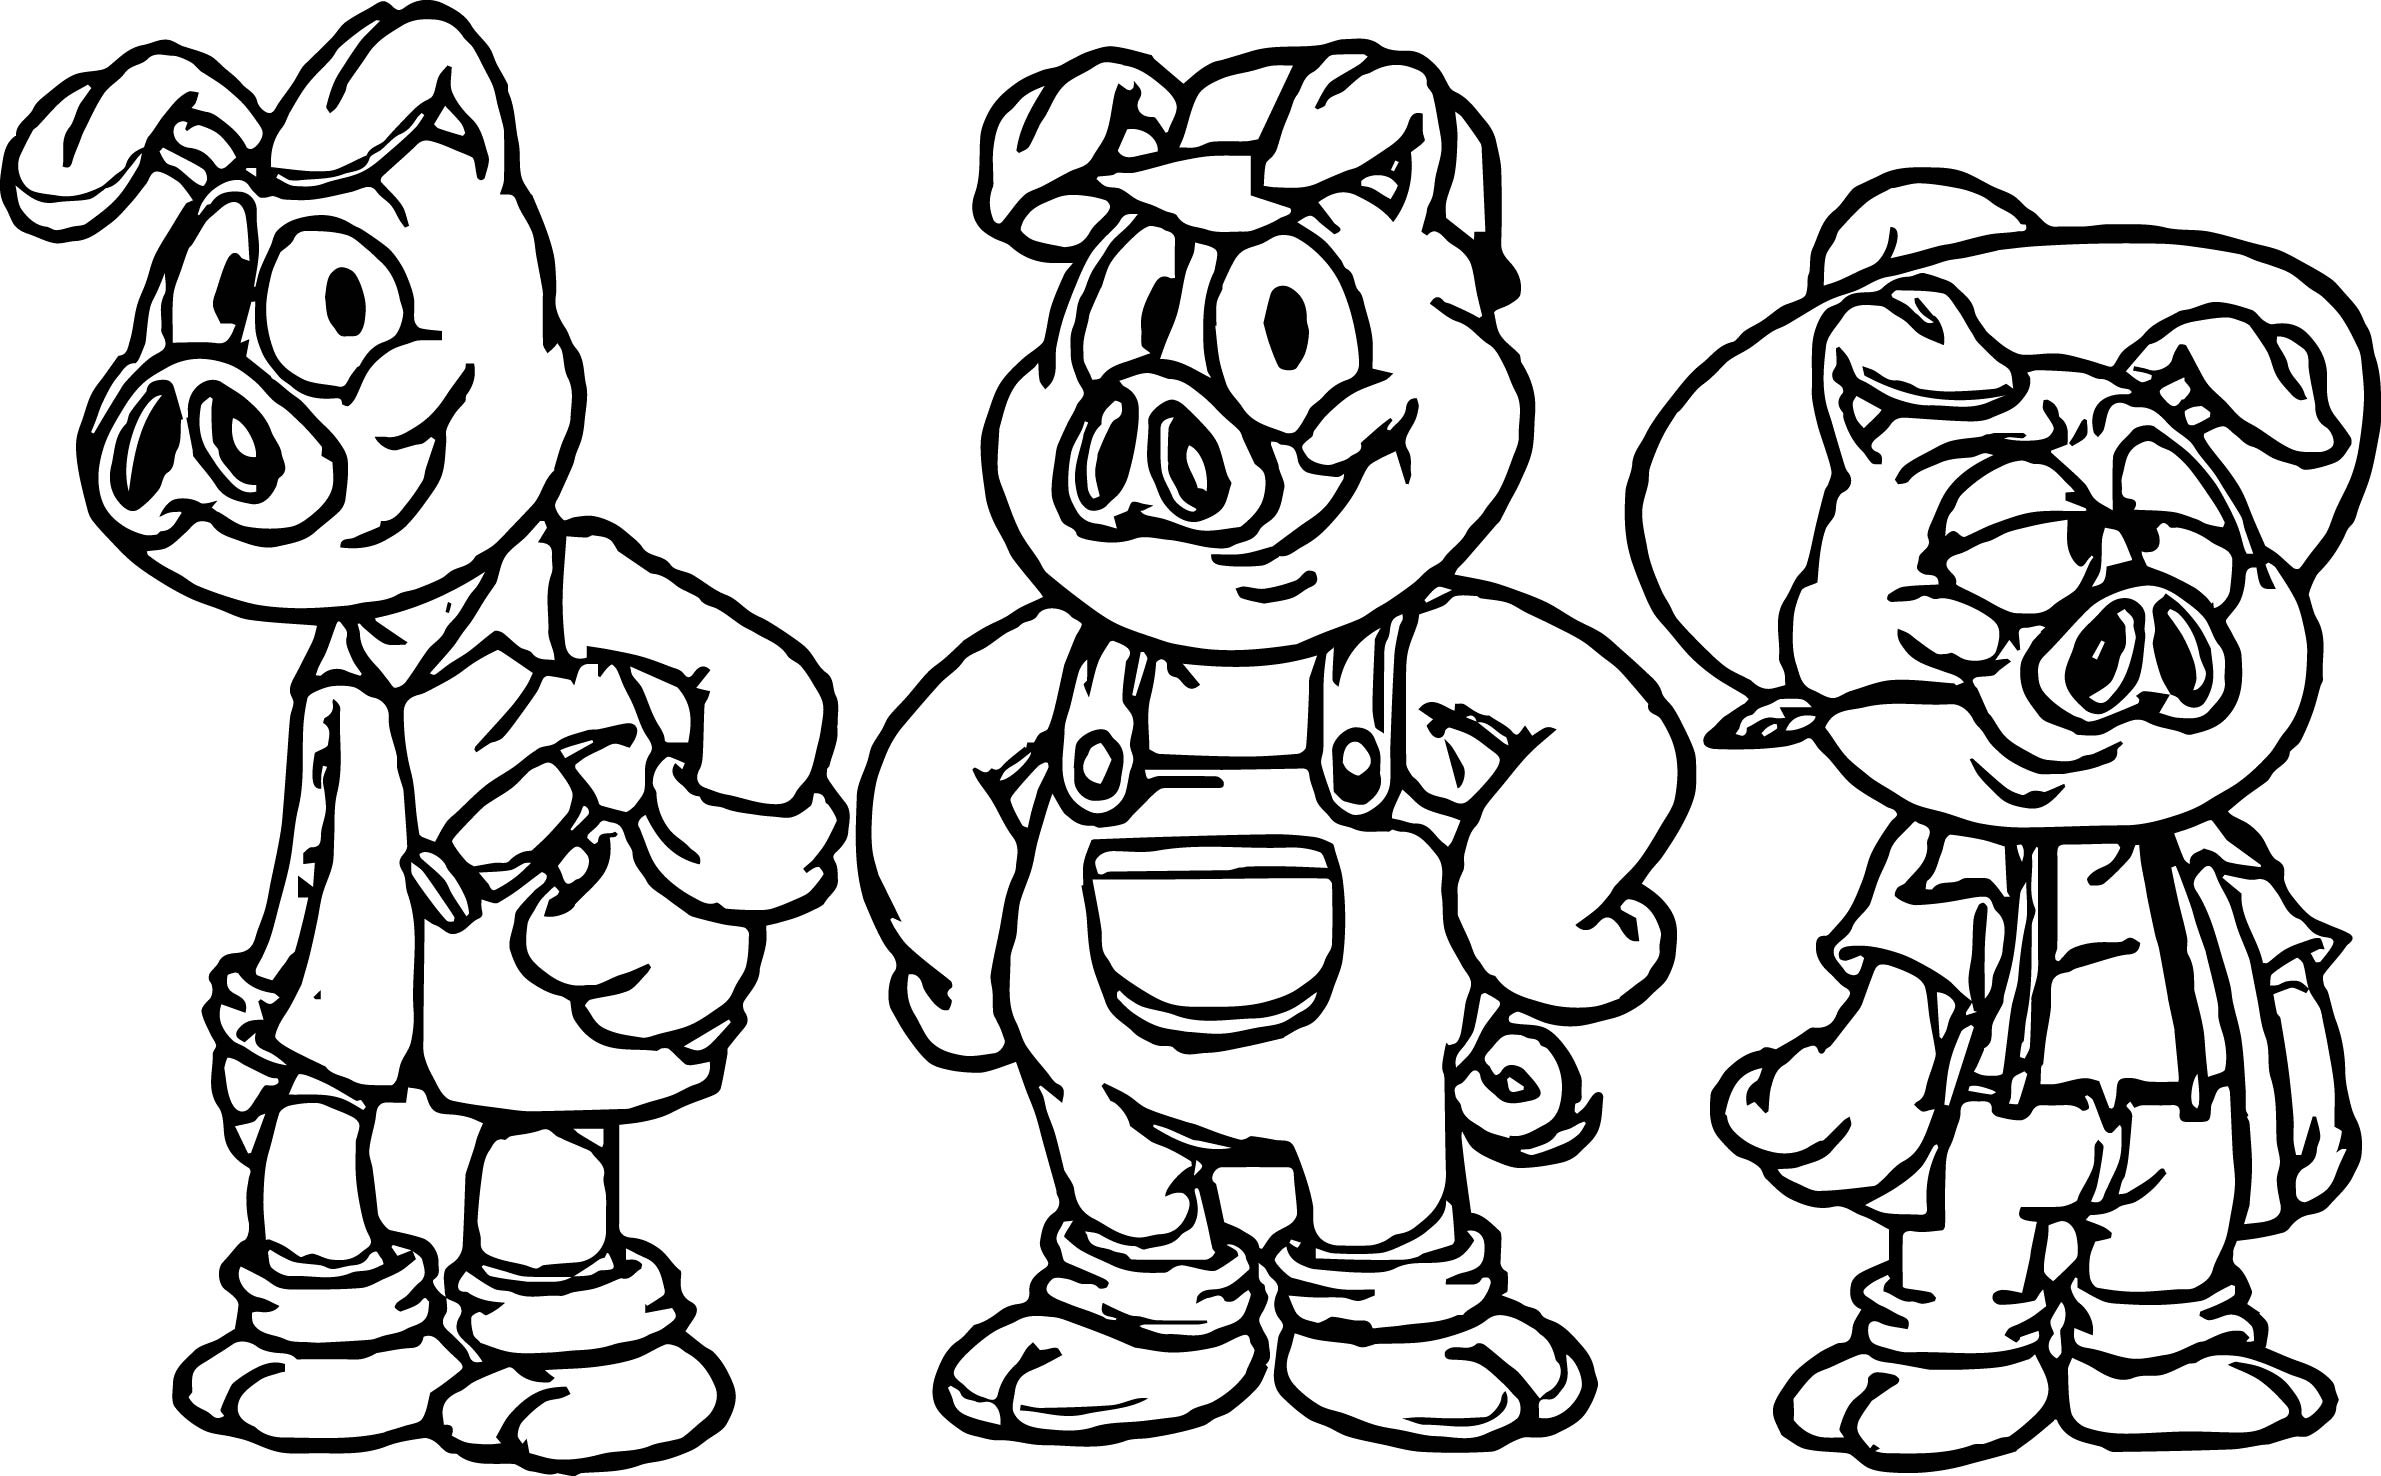 Three Little Pigs Houses Coloring Pages at GetColorings.com | Free